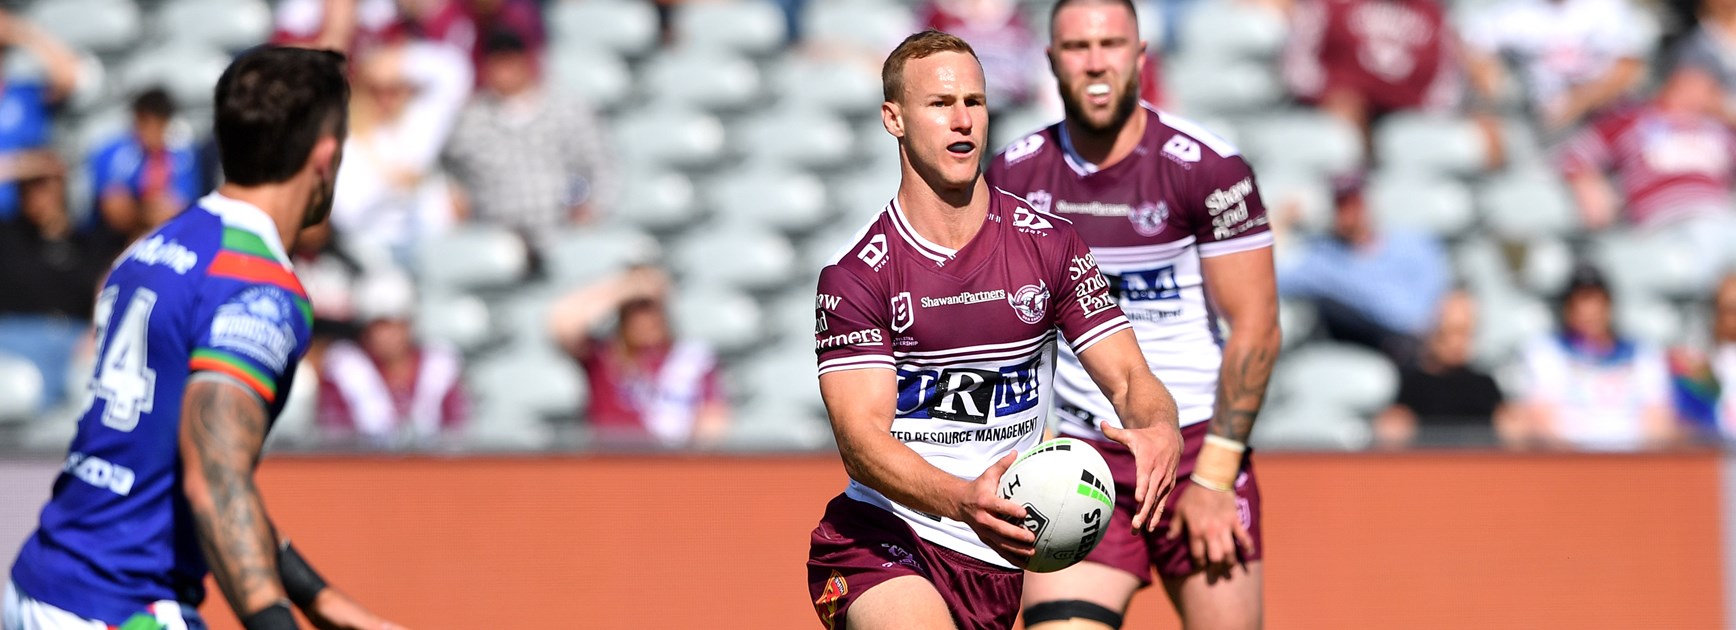 Cherry on top: Manly maestro voted best player over 30